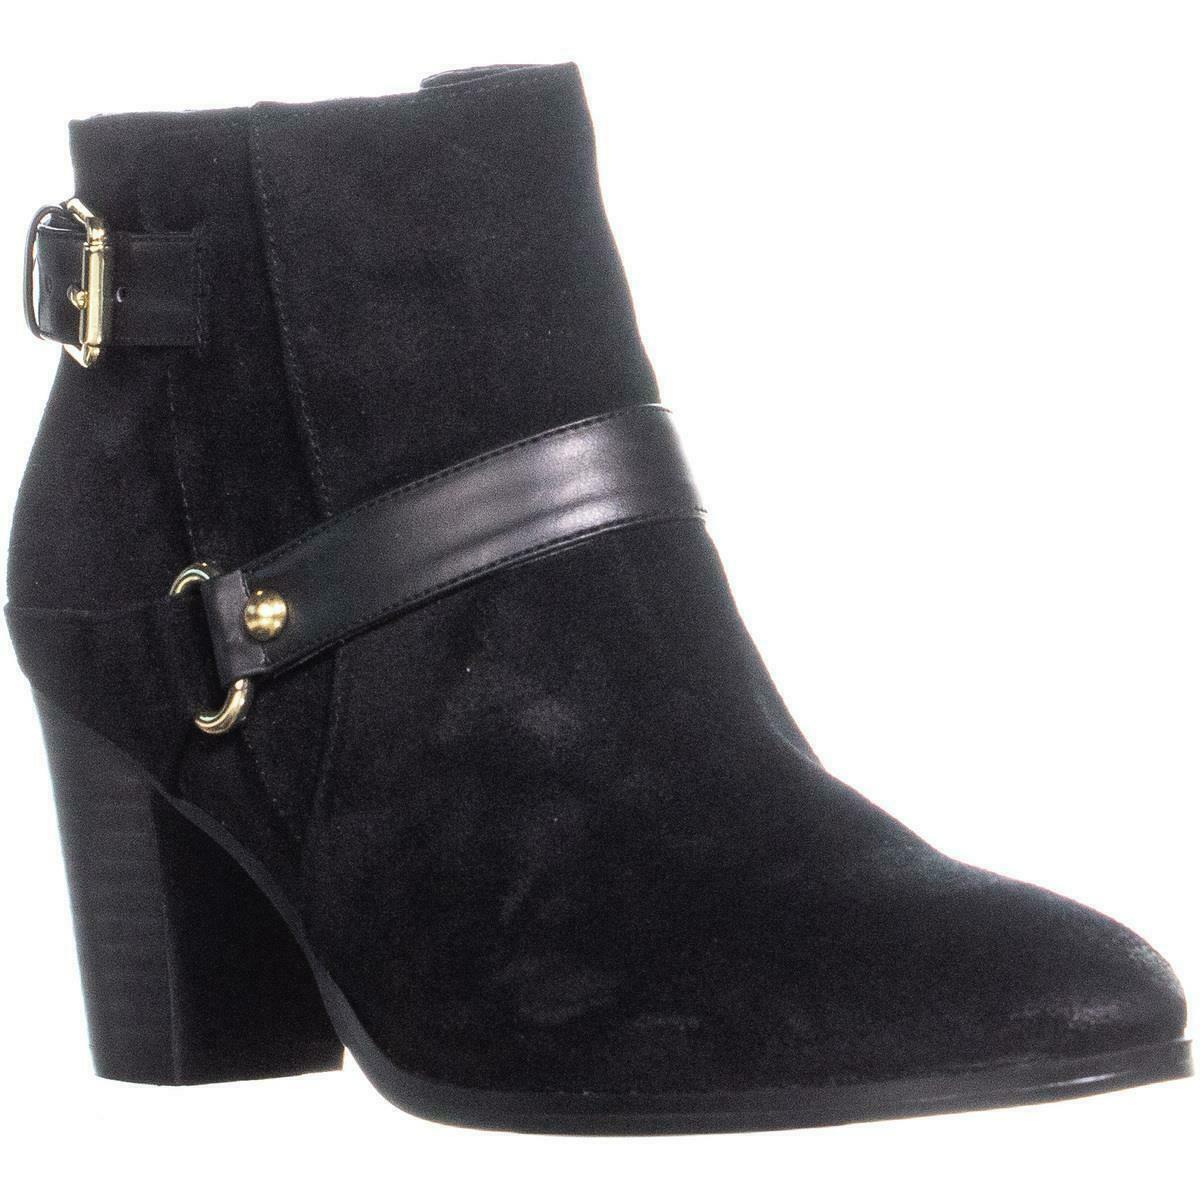 Marc Fisher Ella Casual Ankle Boots, Black, 6 US - Boots